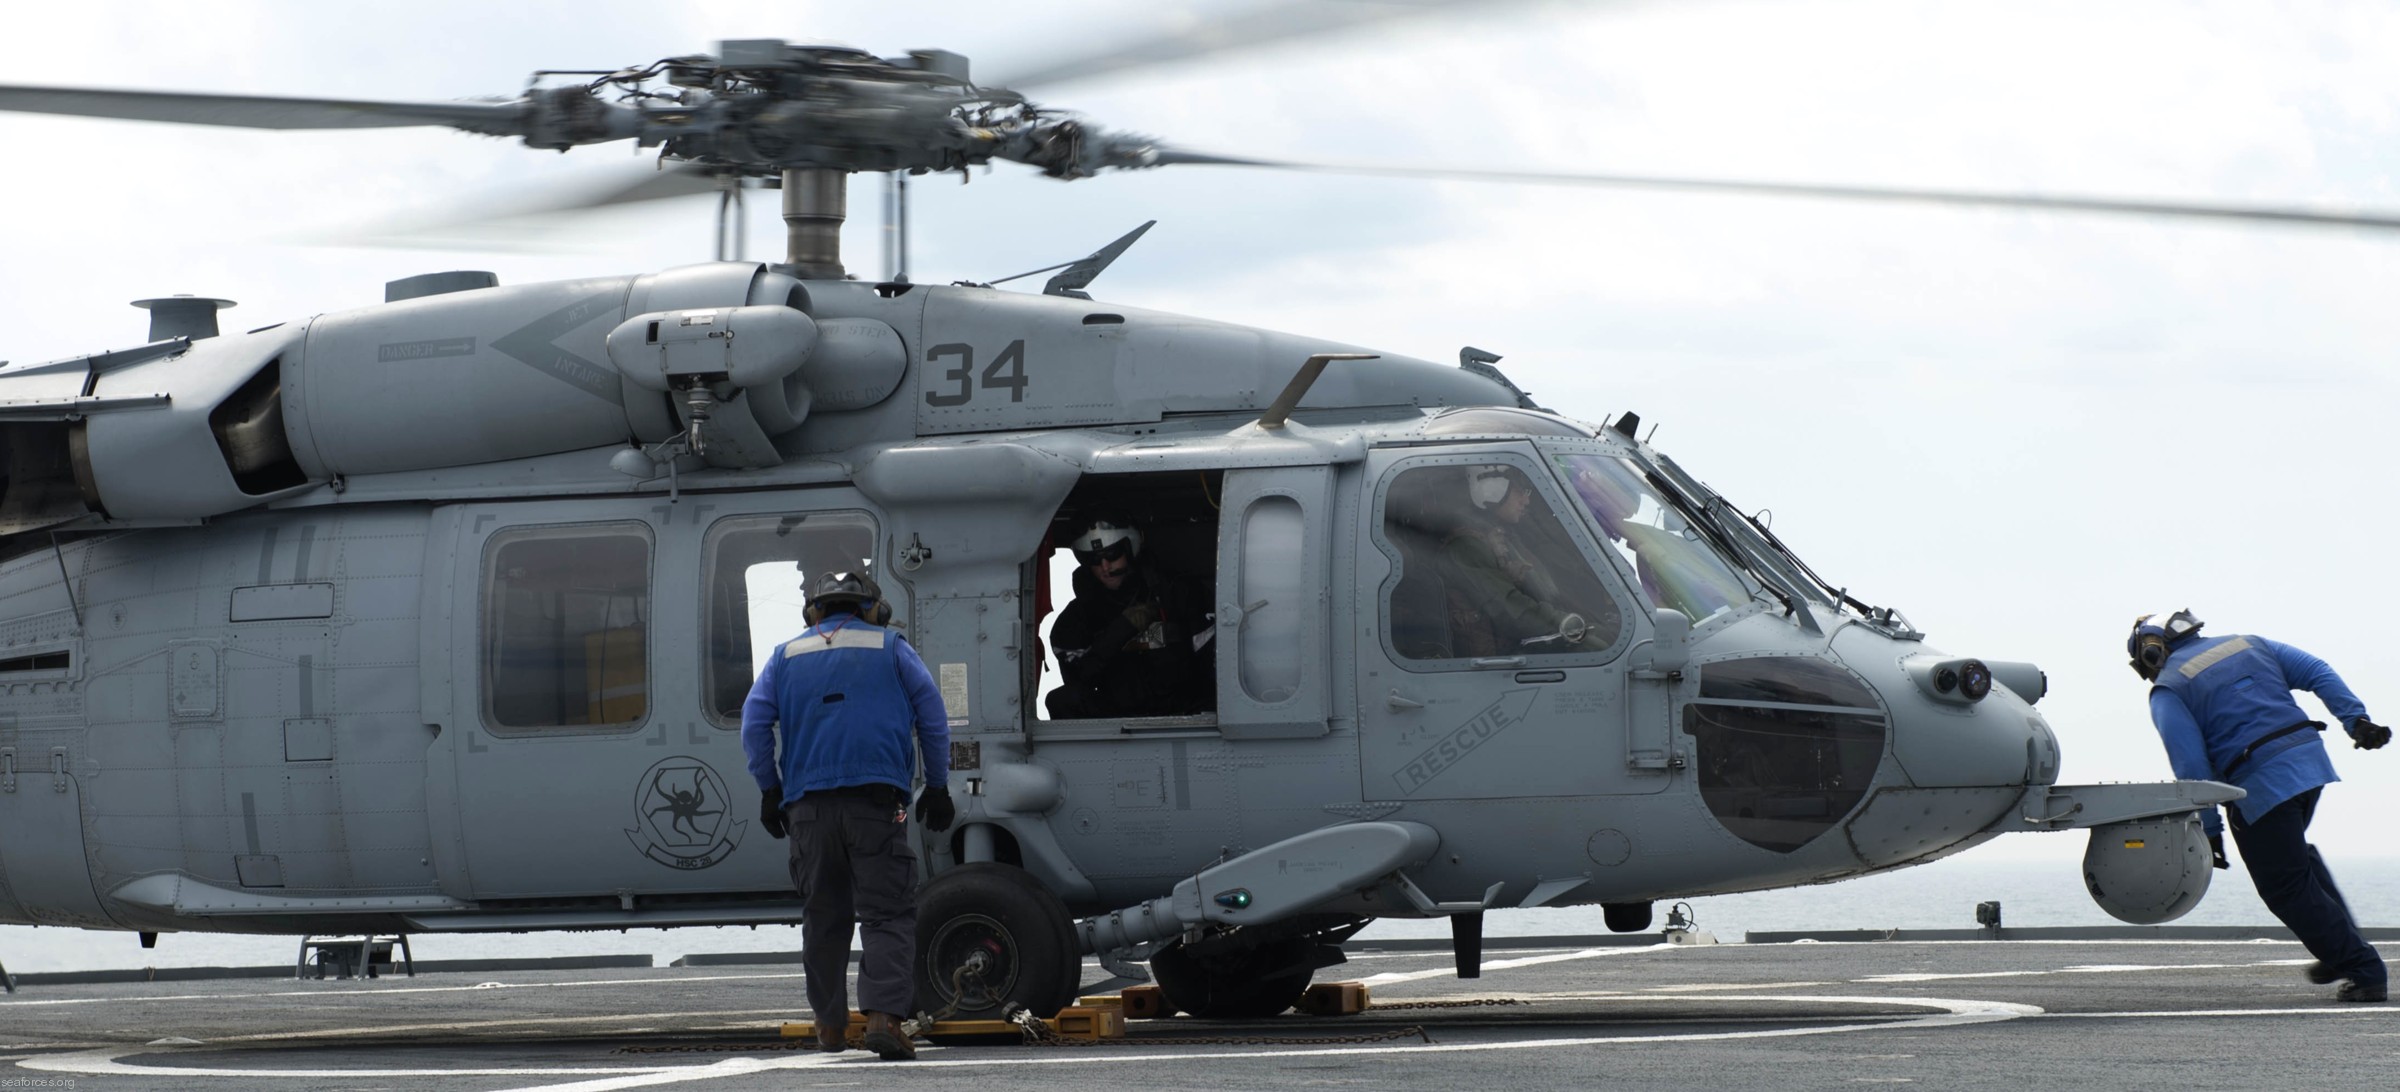 hsc-28 dragon whales helicopter sea combat squadron mh-60s seahawk us navy 229 uss mount whitney lcc-20 baltic sea